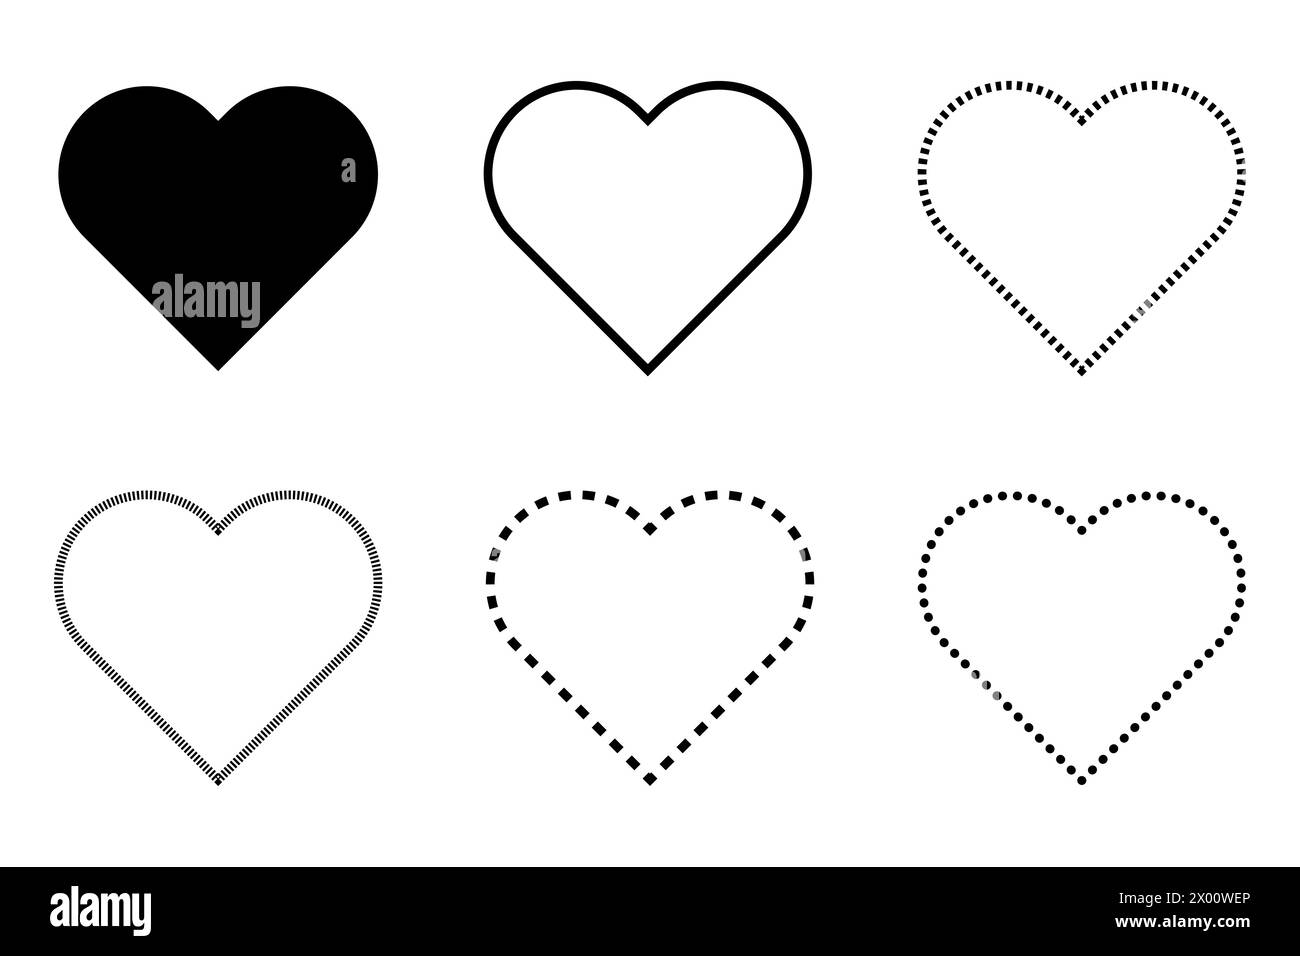 Heart silhouettes of various shape vectors. Stock Vector